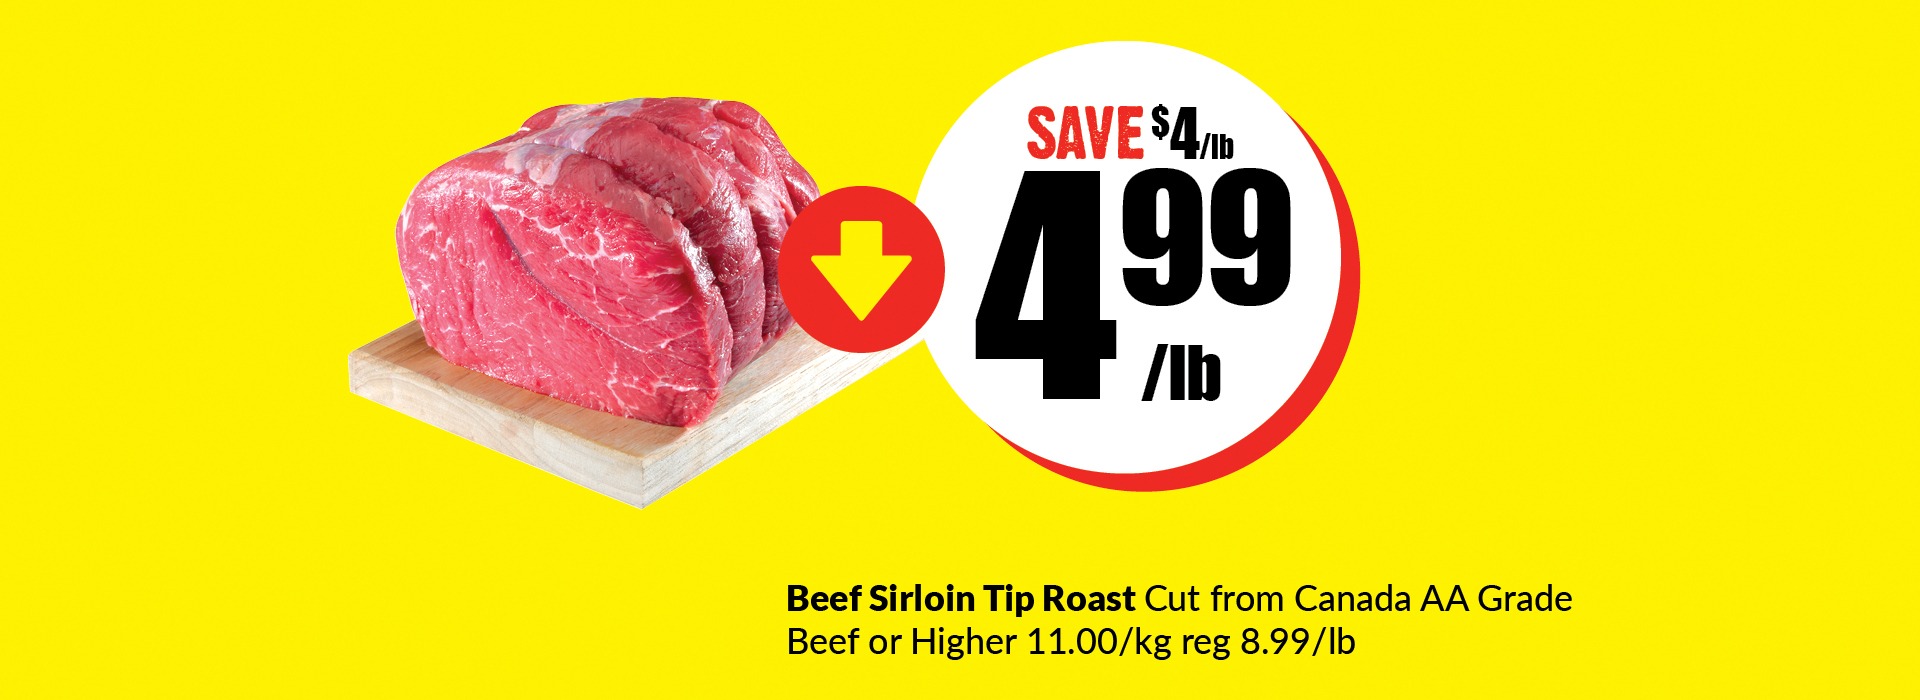 Text Reading, “Save $4 per pound and buy Beef sirloin tip roast cut from Canada AA Grade at $4.99 per pound. Beef or higher $11.00 per kg, regular price $8.99 per pound.”